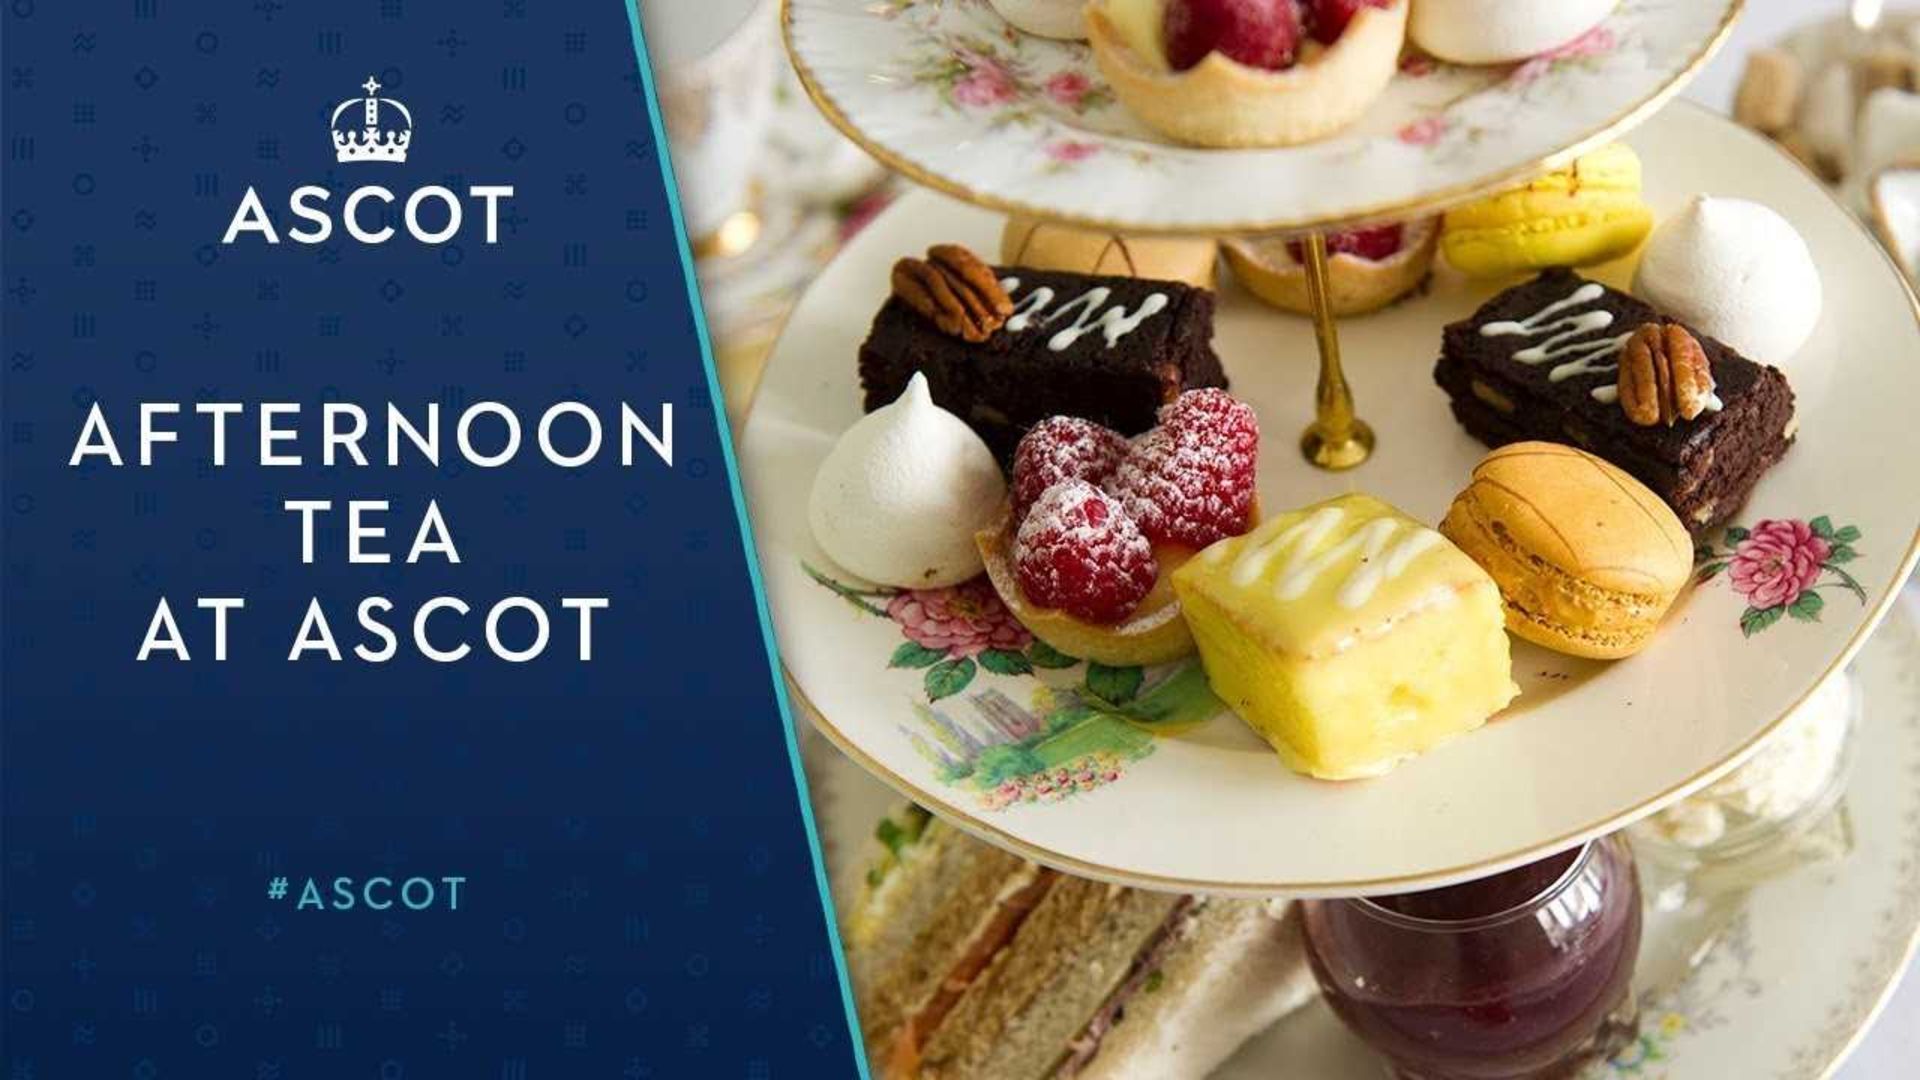 2 Tickets for an Ascot Race Day in 2021 including Afternoon Tea in The Queen Anne Enclosure Within - Image 2 of 2